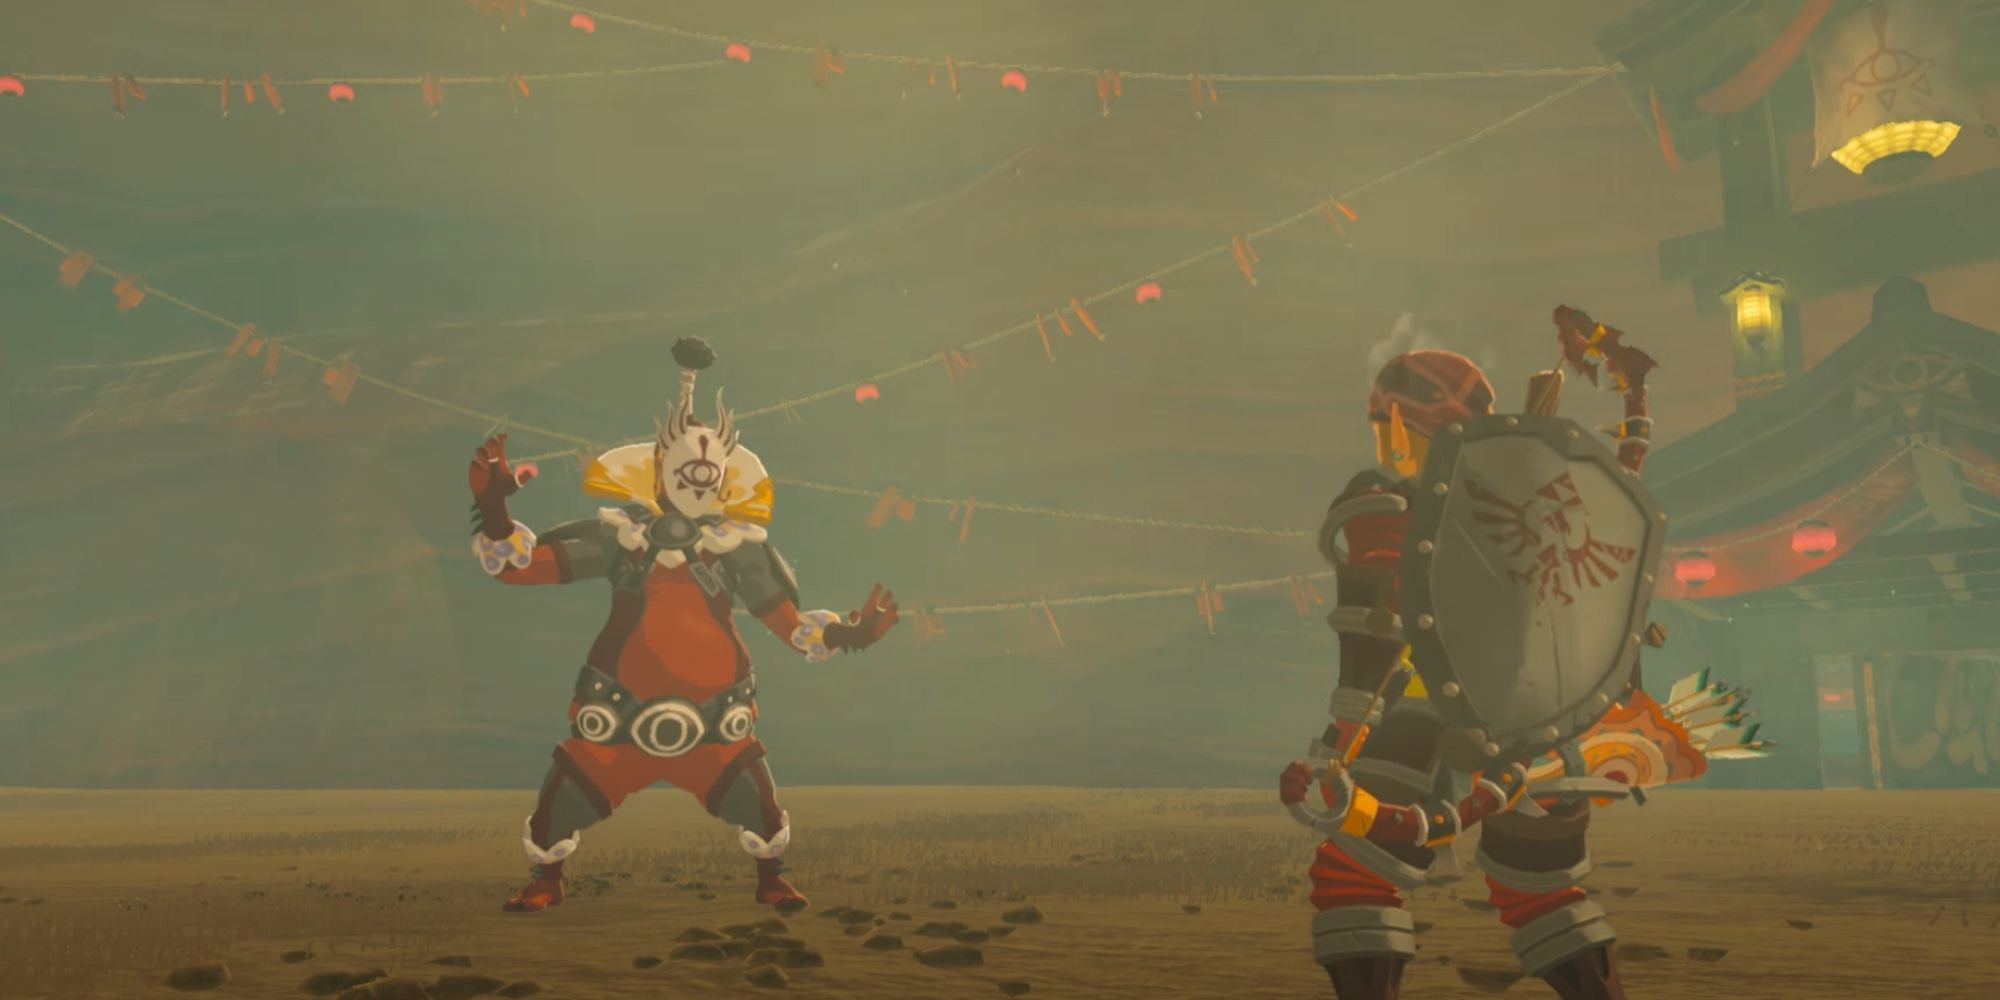 Master Kohga facing Link in the desert in Breath of the Wild